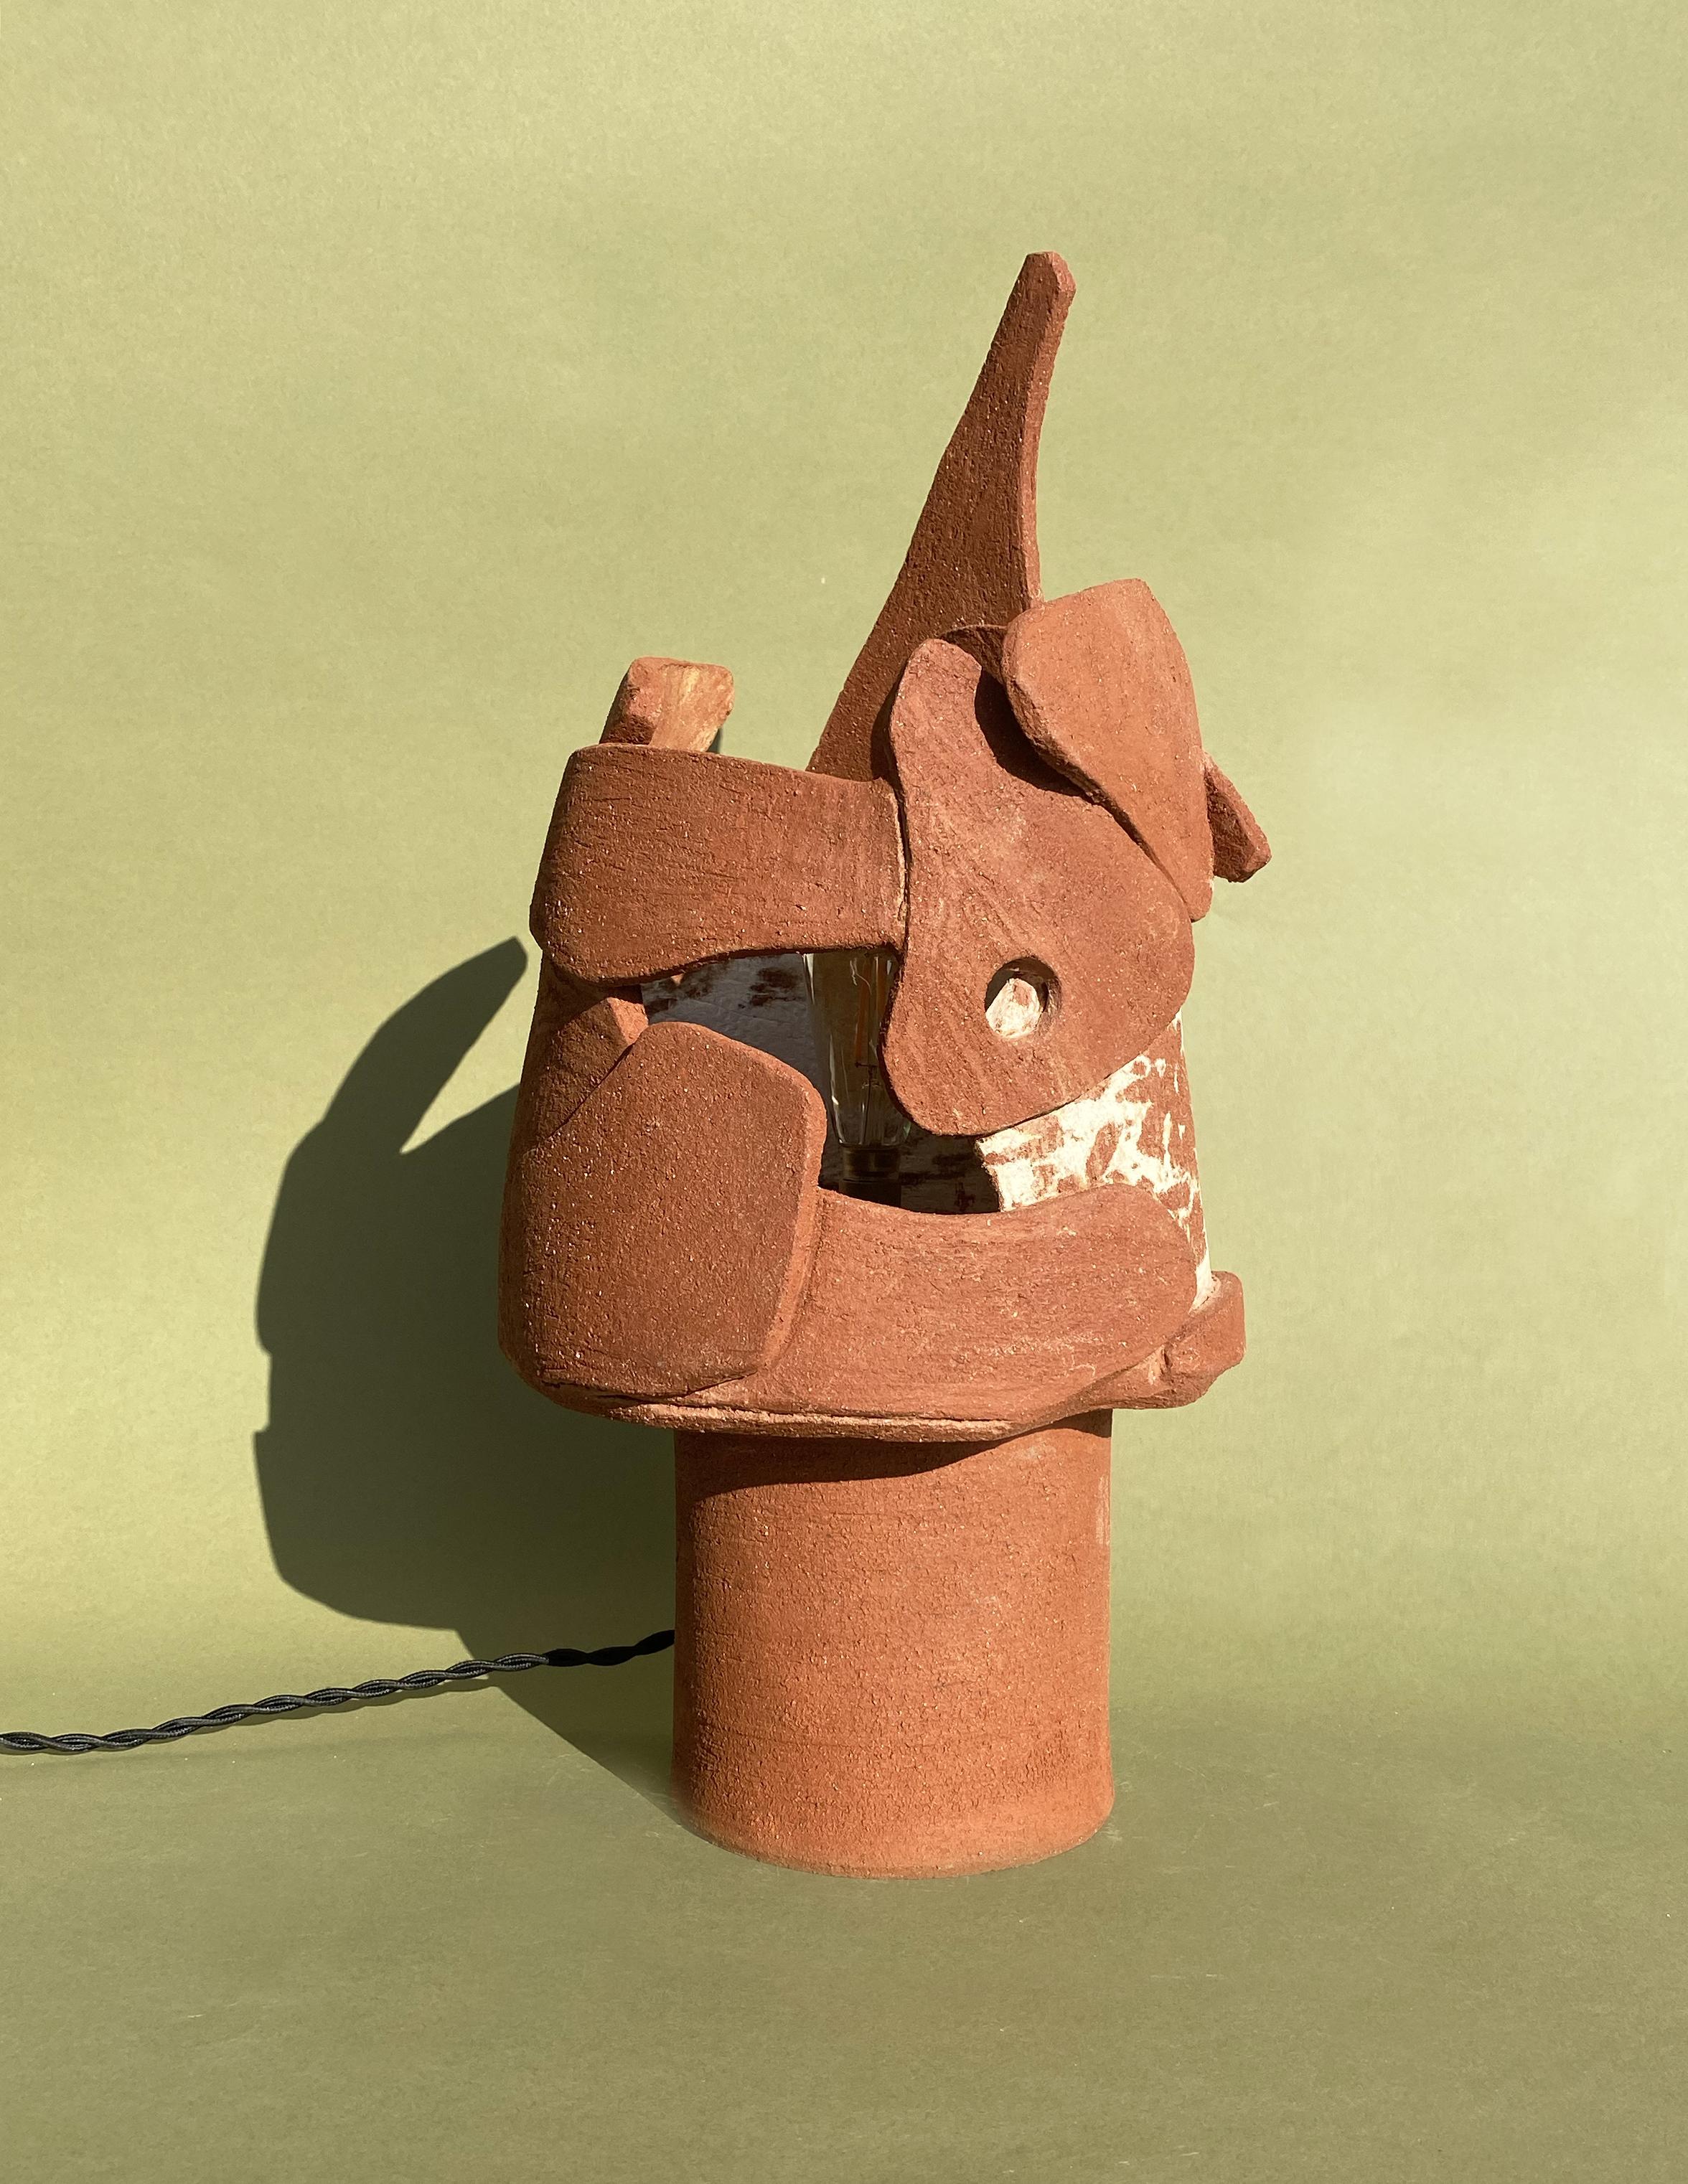 Clay Terra Cotta Lamp by Olivia Cognet